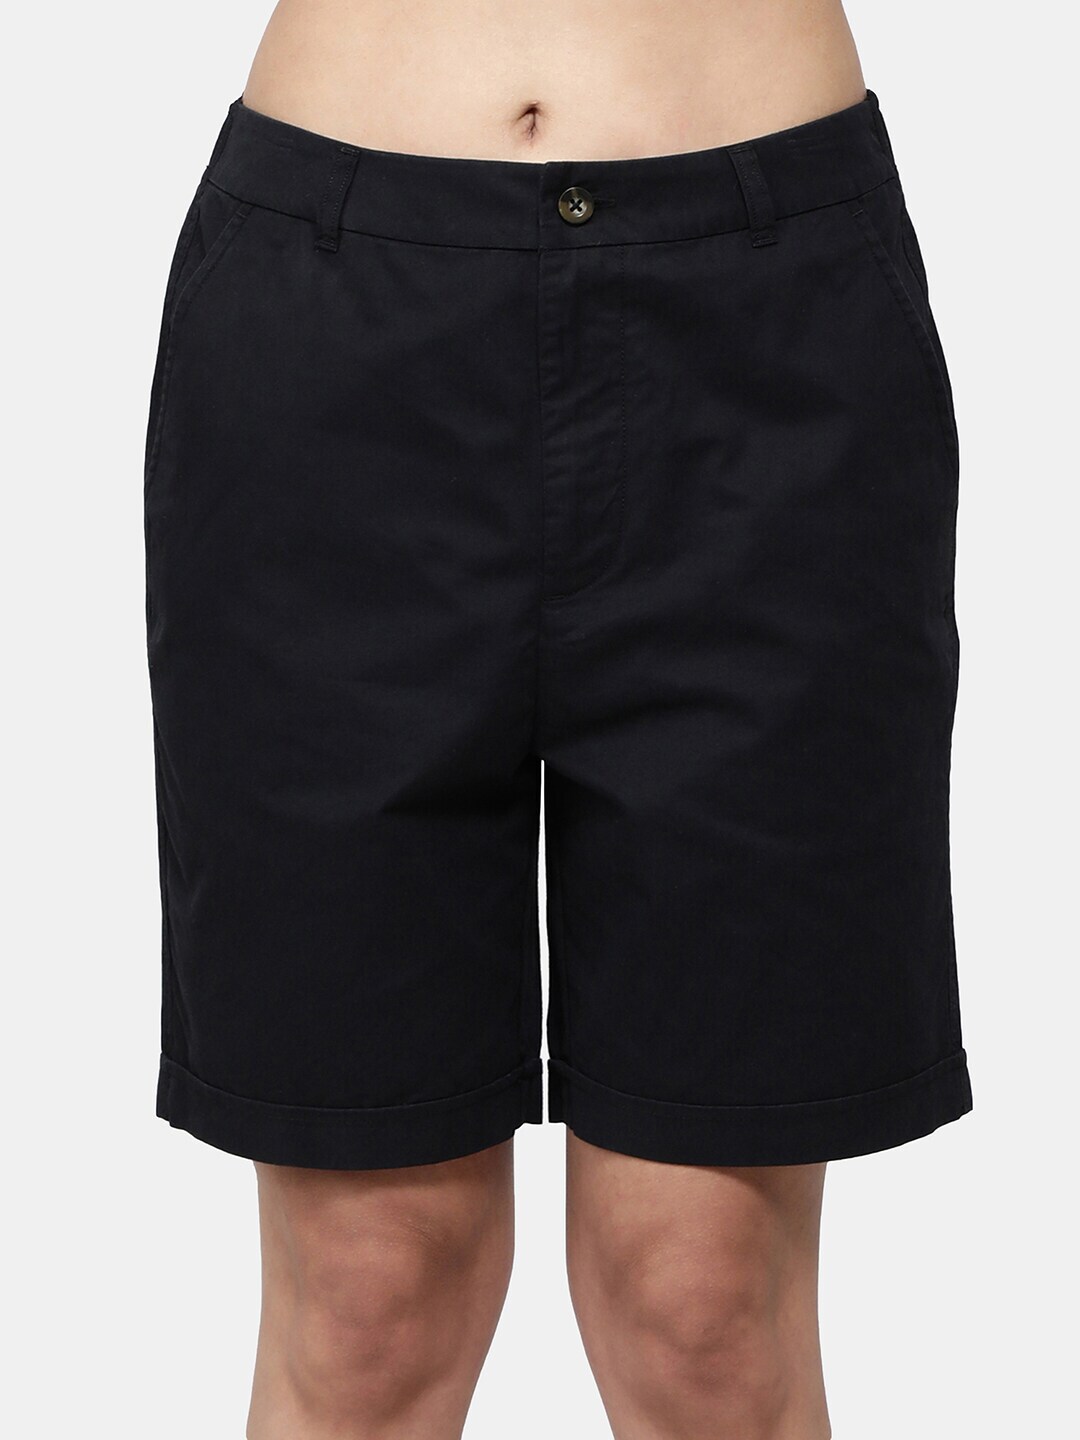 Jockey Women Antimicrobial Mid Rise Cotton Shorts Price in India